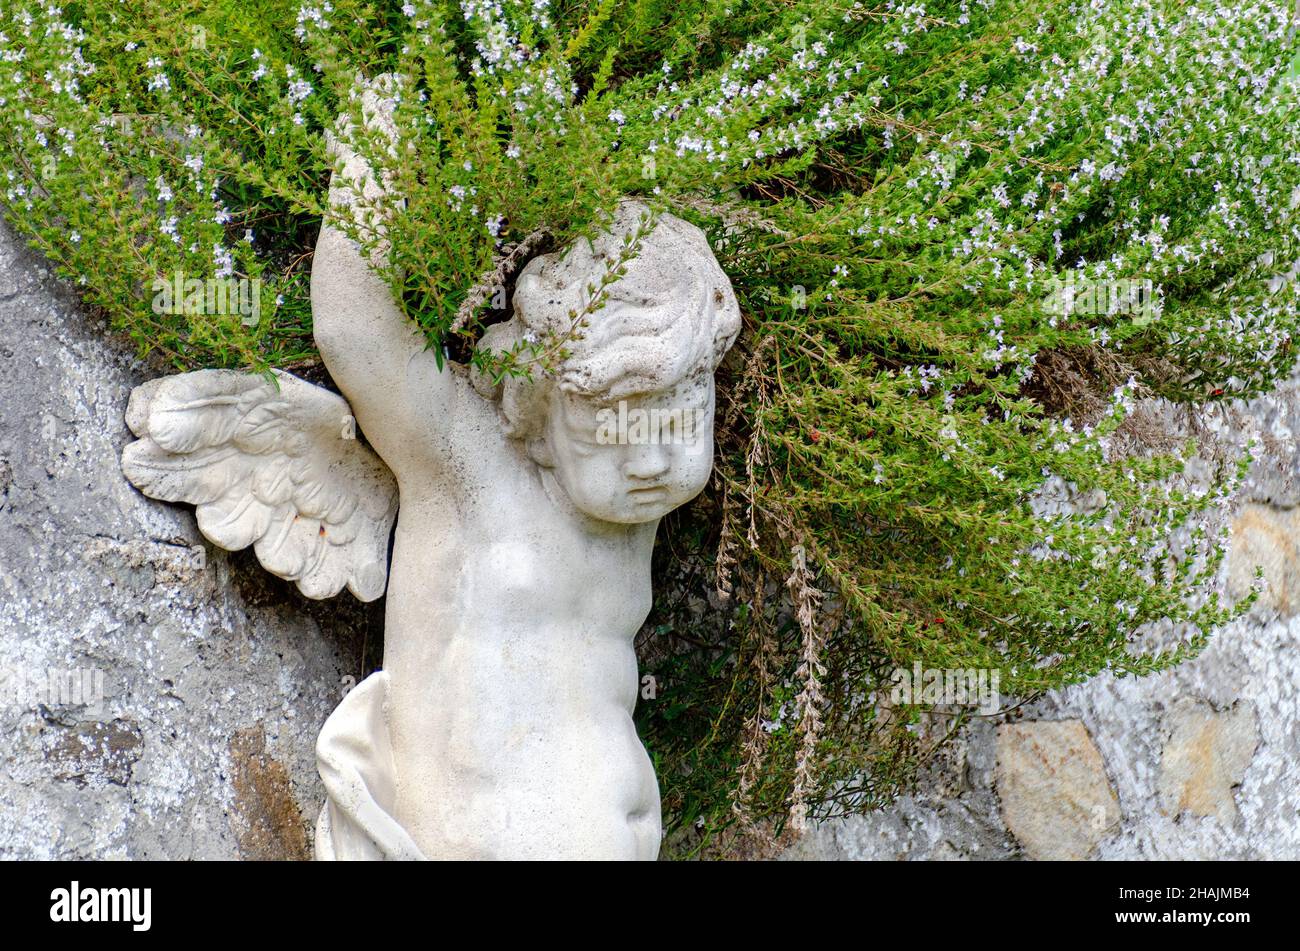 stony figure of a white young angel bears a green.rock garden plant with white blossoms Stock Photo